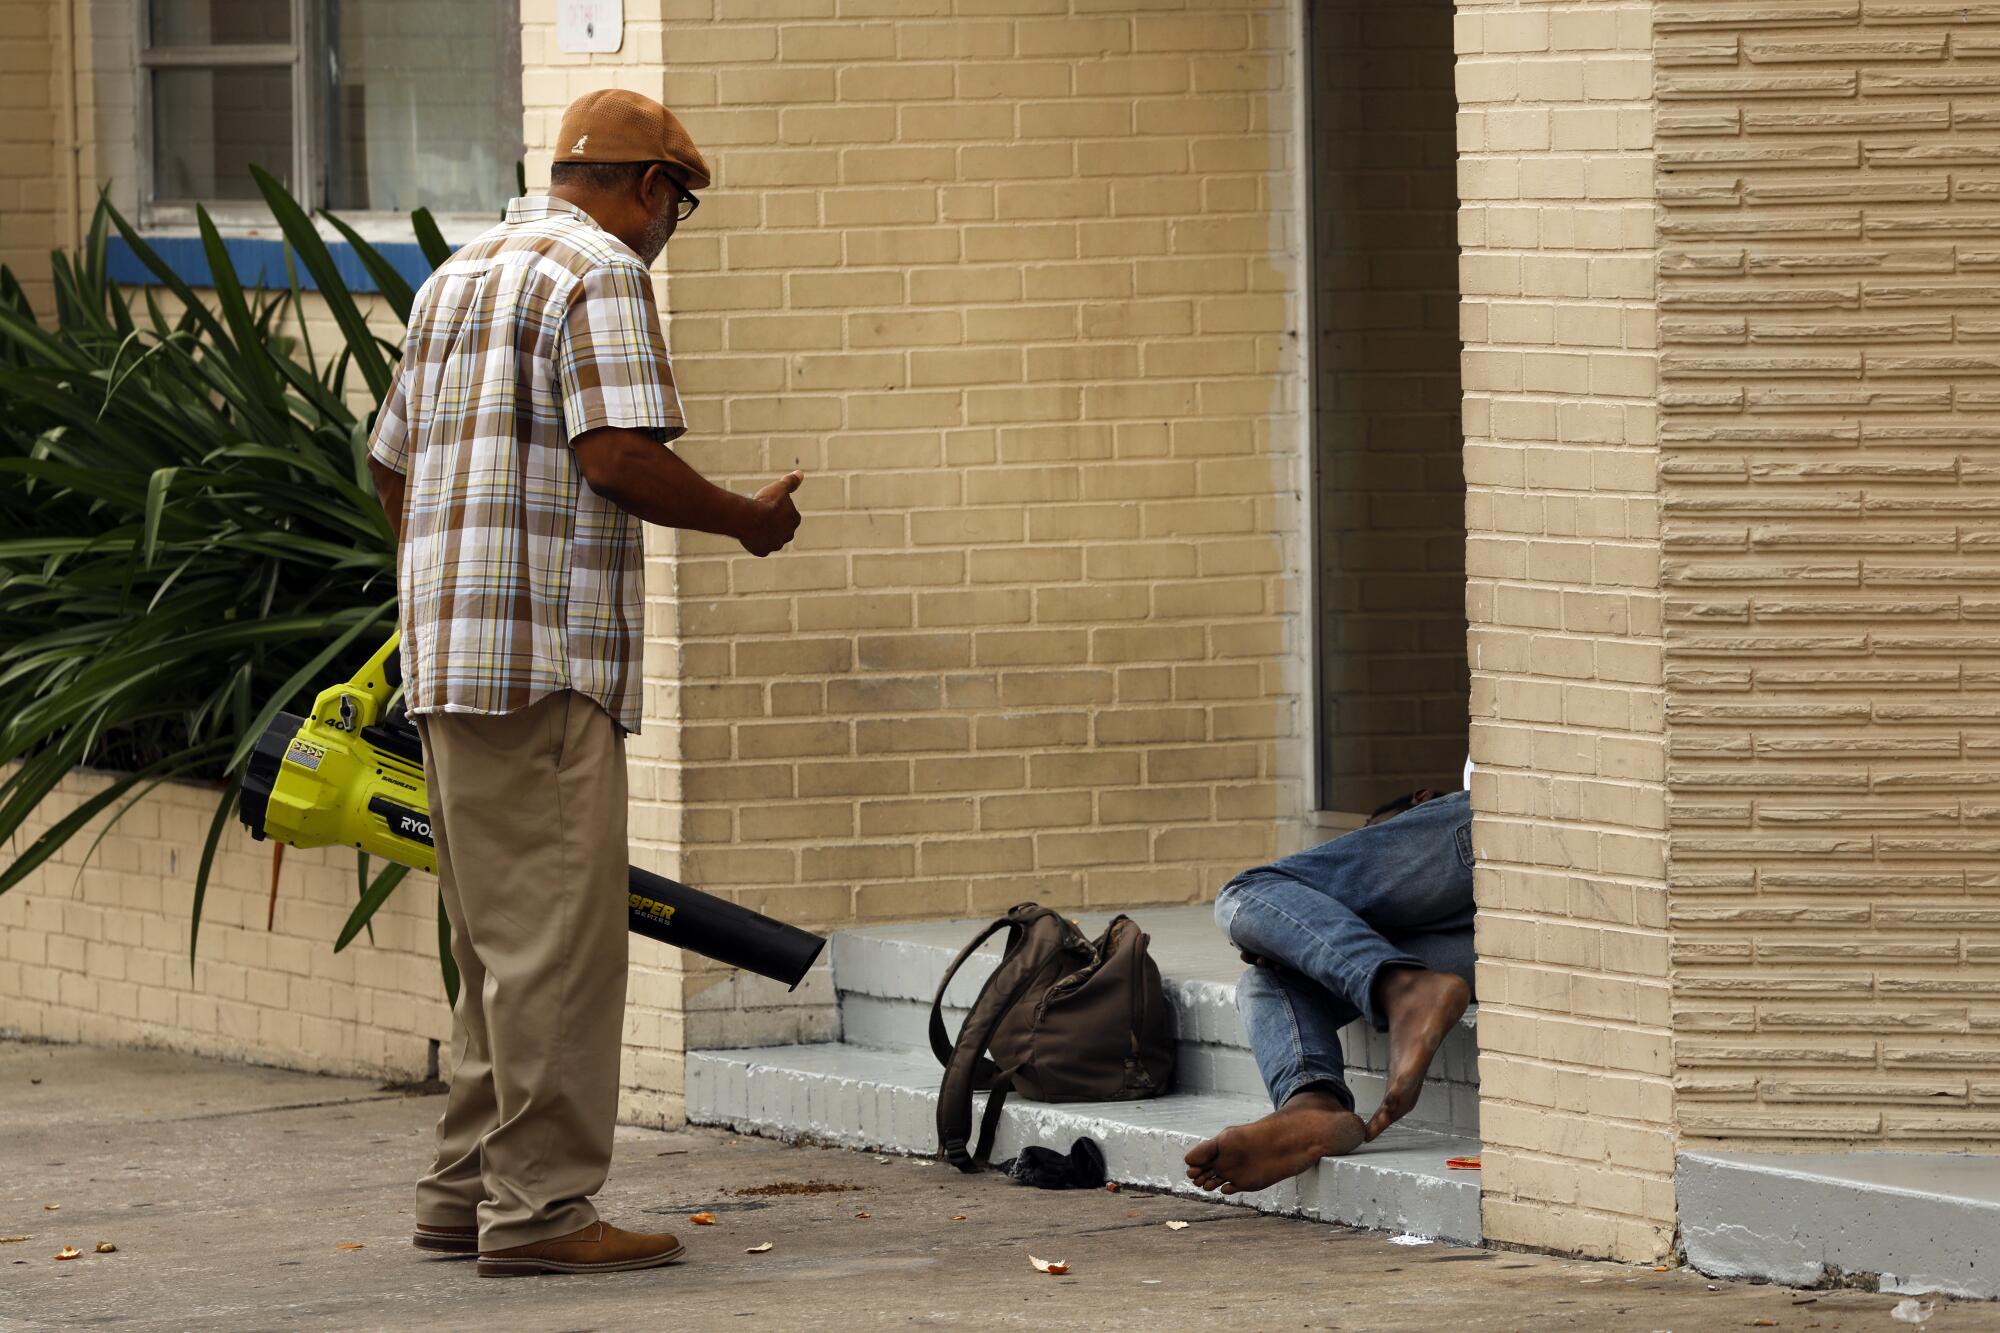 A man in a plaid shirt and khaki pants holding a leaf blower speaks to a person lying on steps near a backpack 